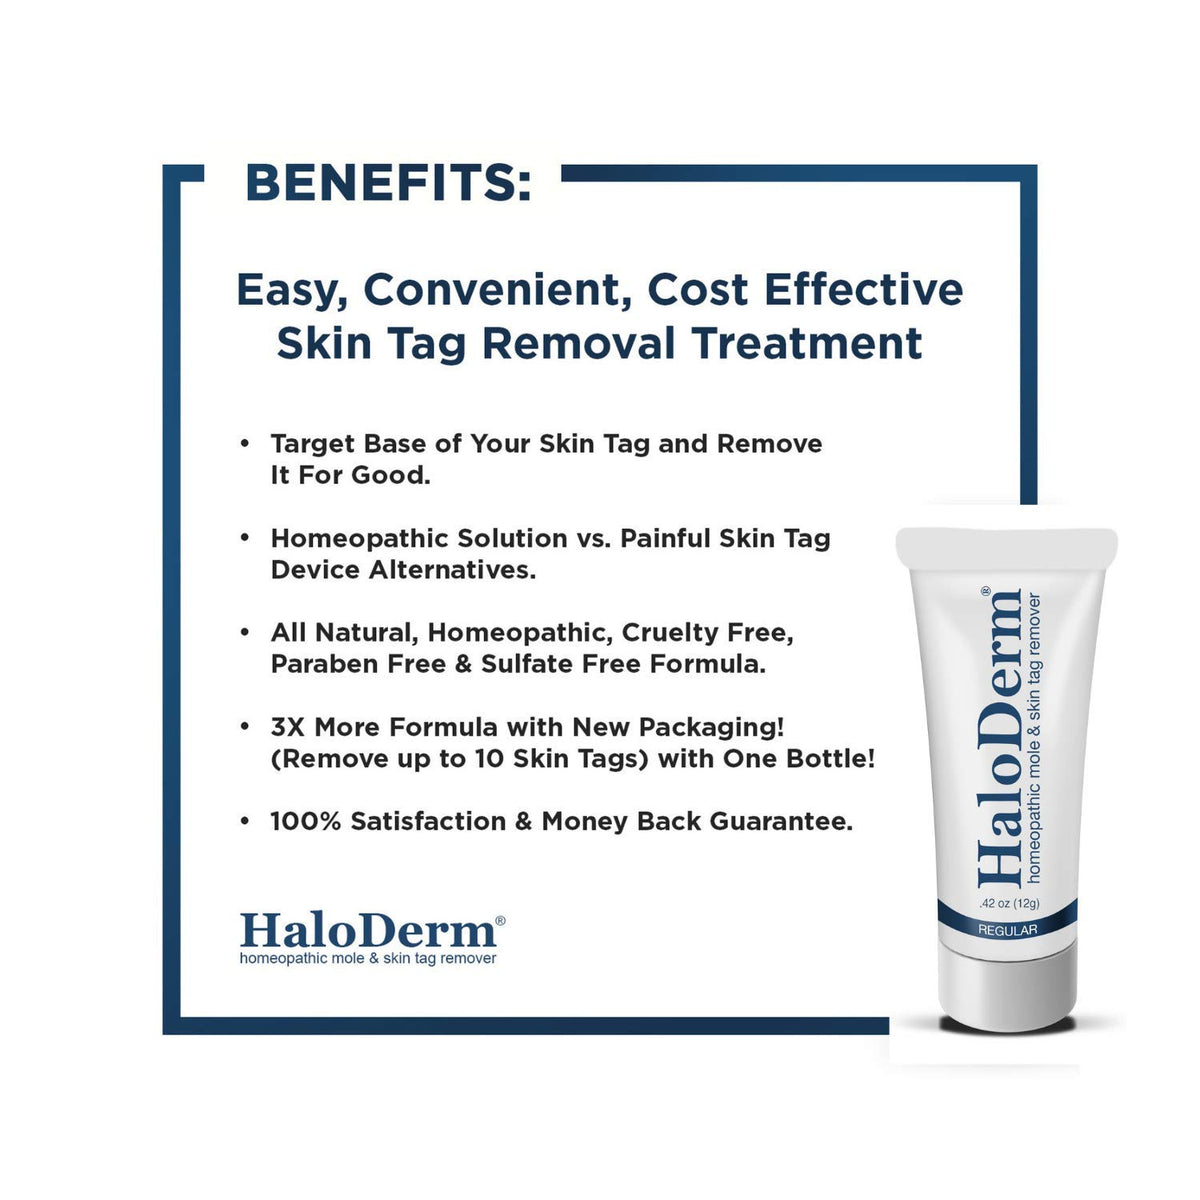 Haloderm Regular Skin Tag And Mole Remover